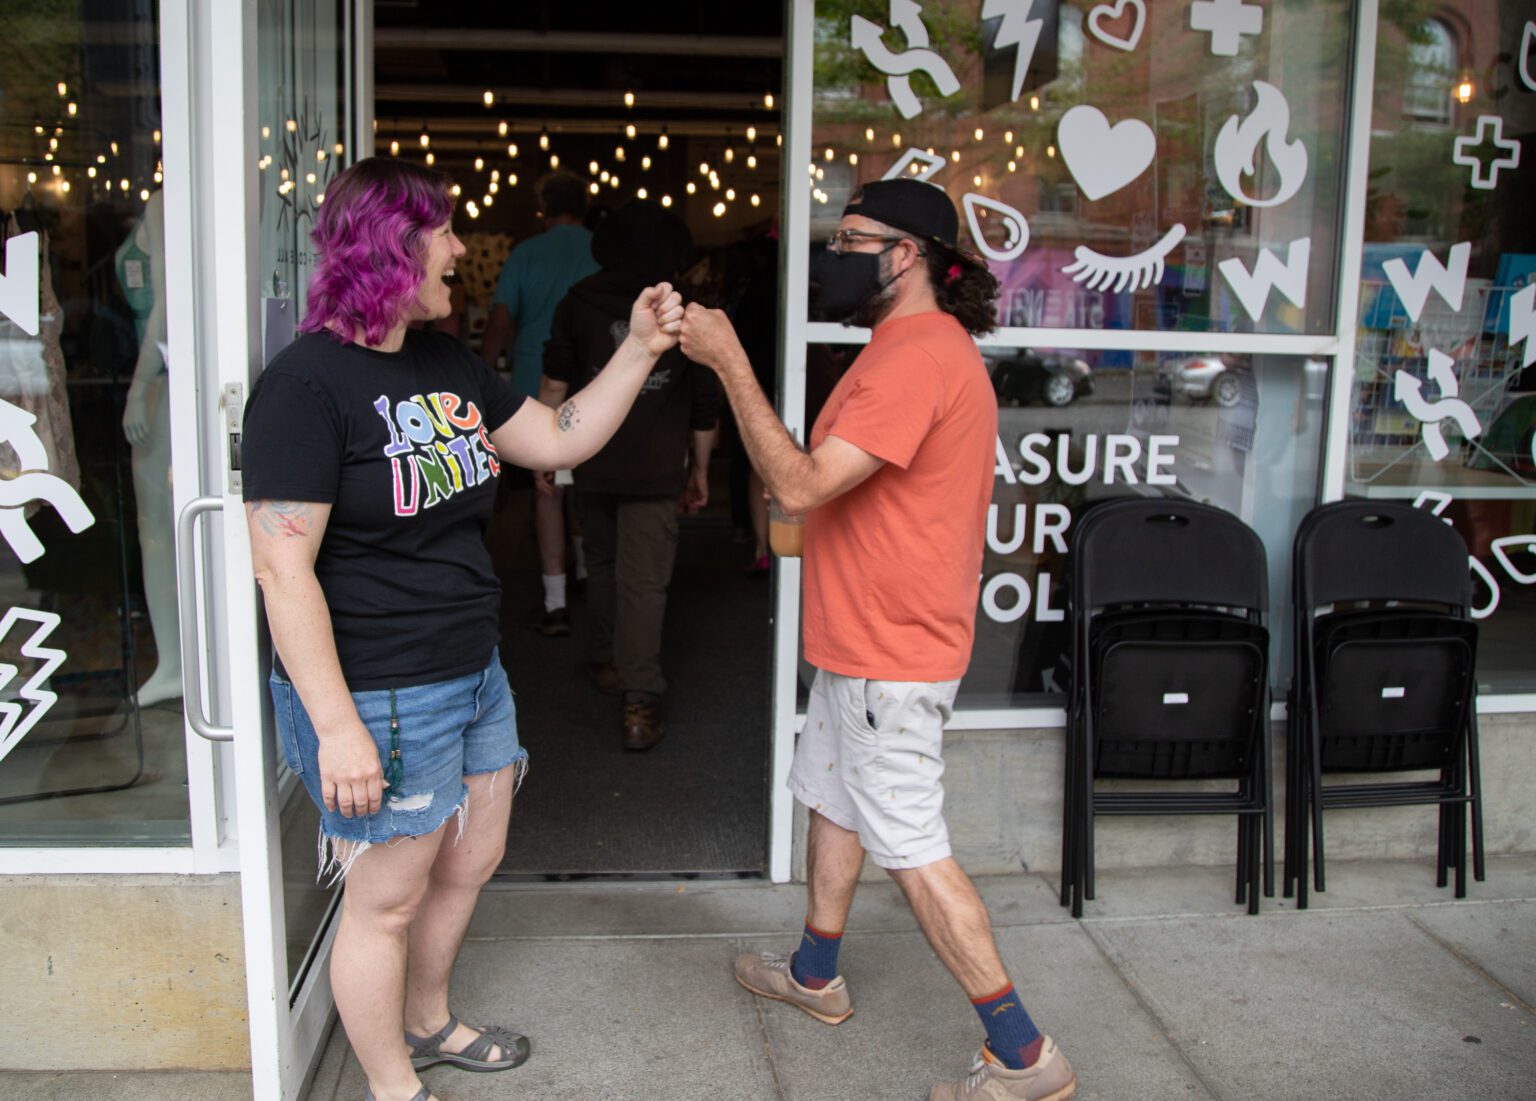 WinkWink Boutique employee Tiffany Geaudreau fist-bumps a supporter as they enter the store on July 8. The local sex shop expected protesters in response to its sex education course "Uncringe Academy" for 9- to 12-year-olds and 13- to 17-year-olds. No protesters showed up